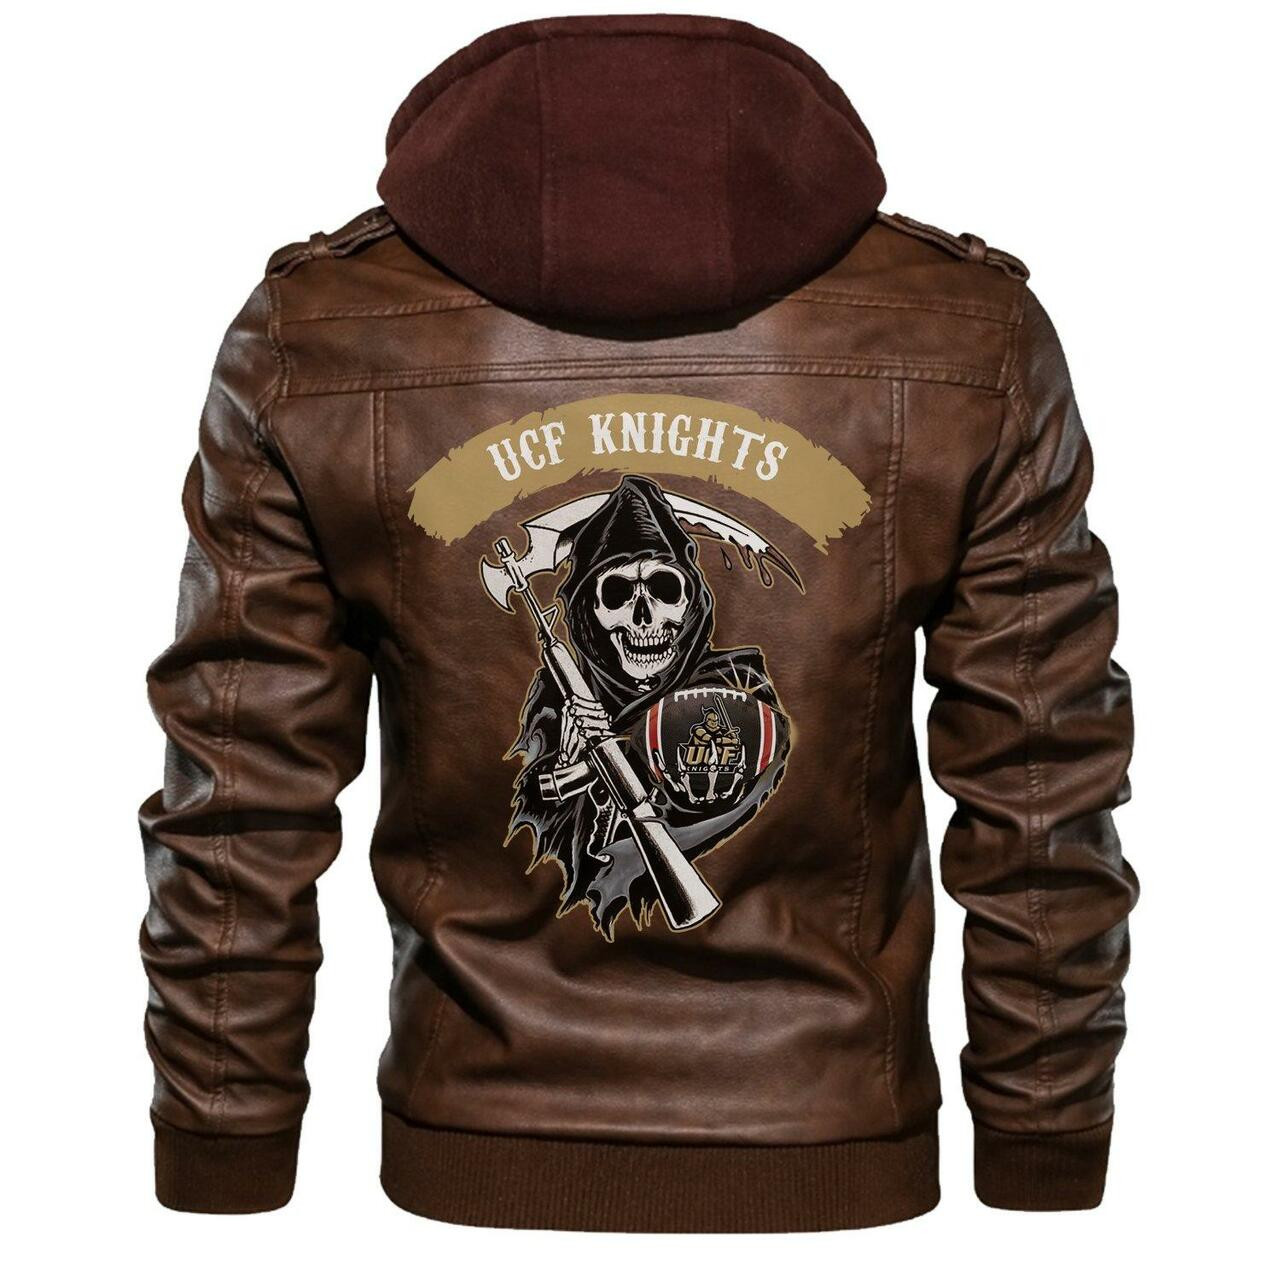 Check out our collection of the latest and greatest leather jacket 76